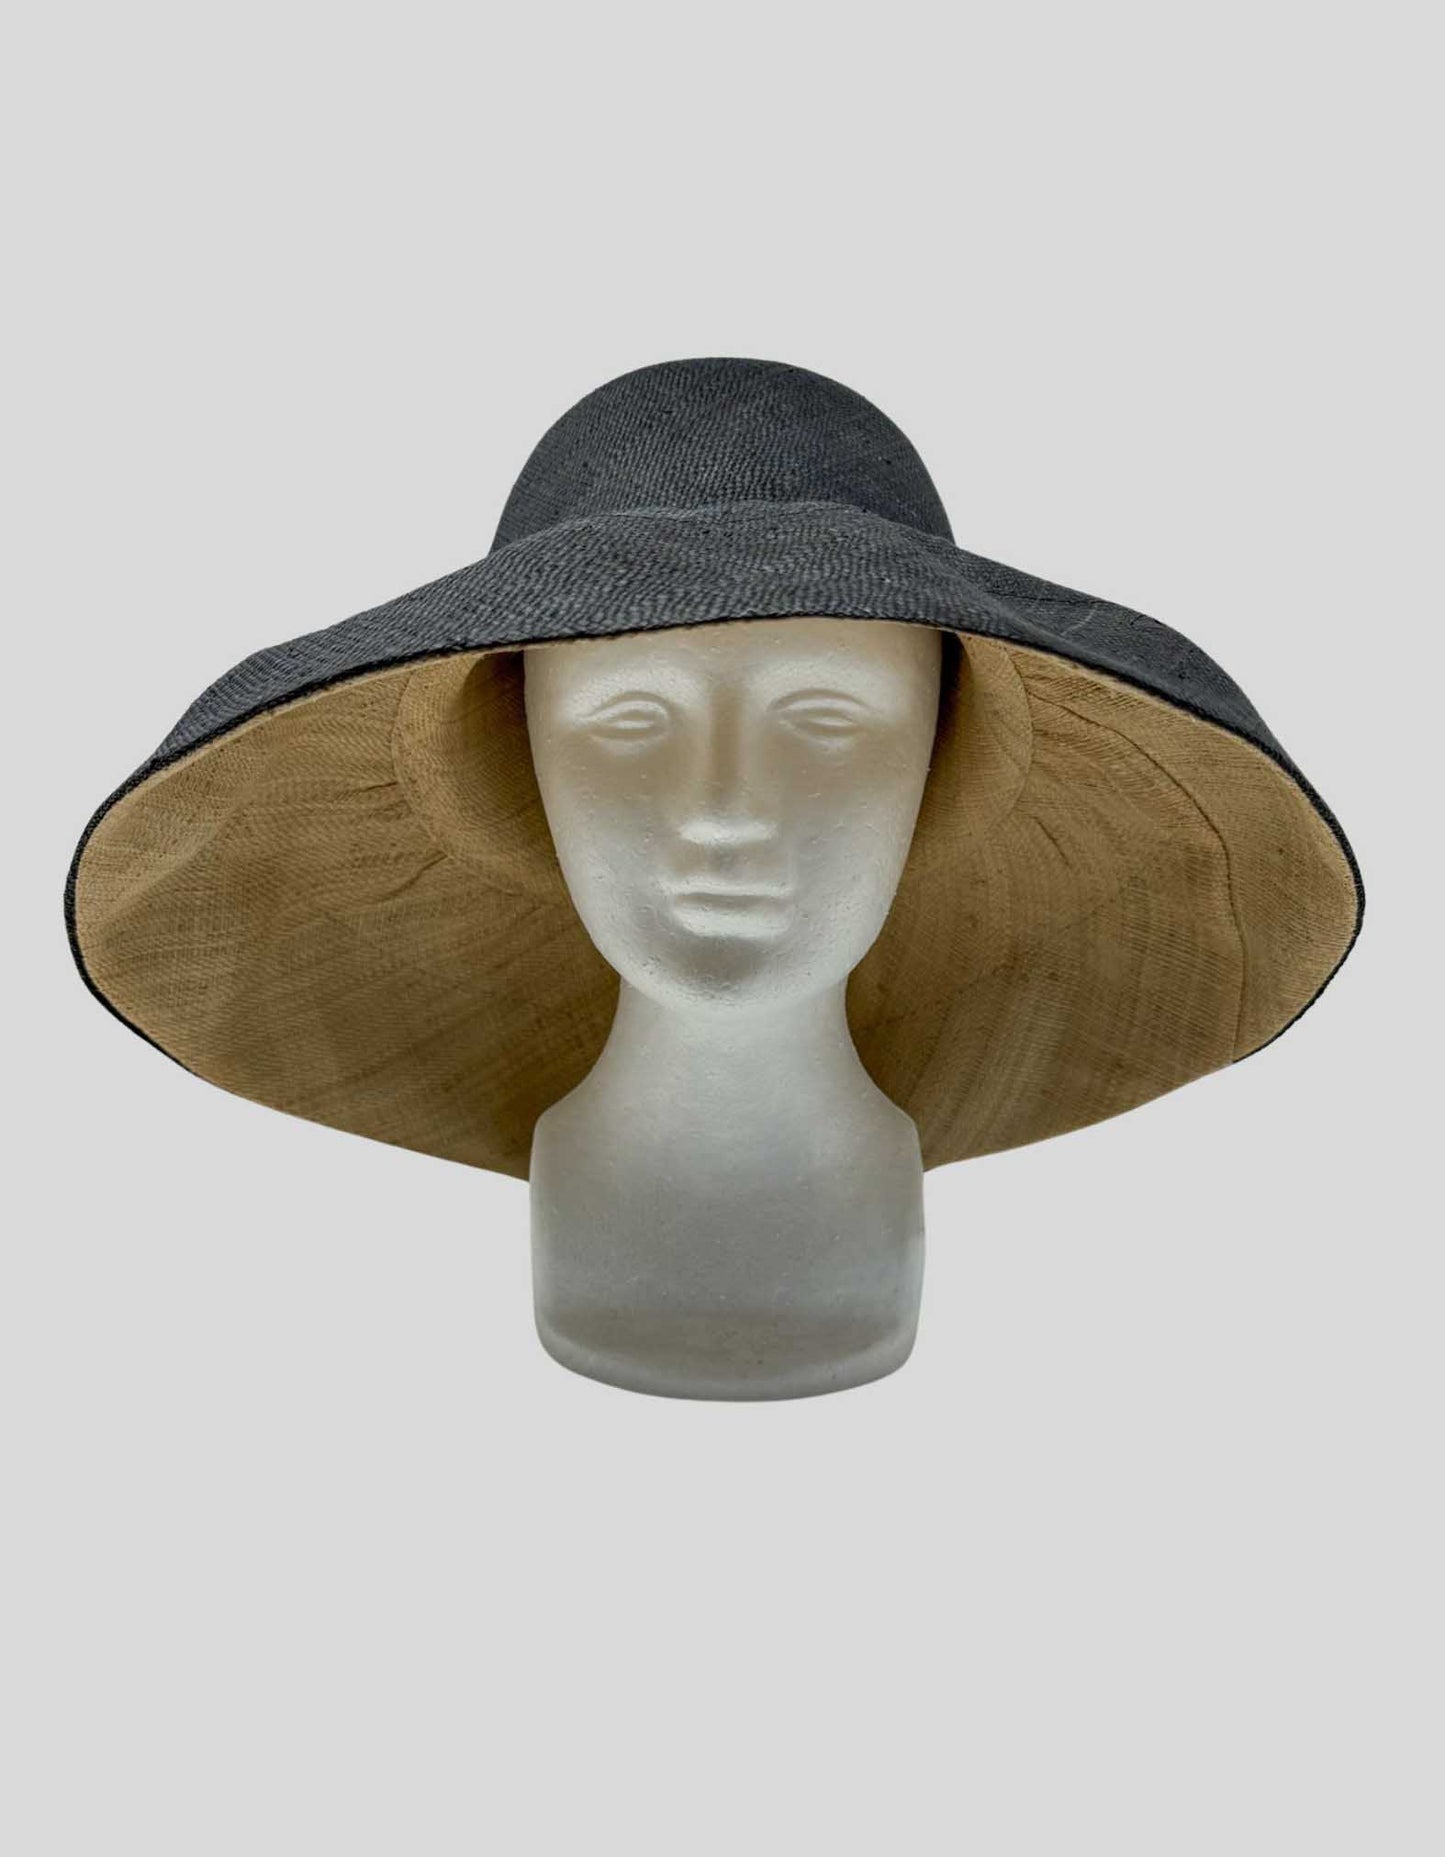 SHEBOBO 5" Wide Brim Two Tone Packable Straw Sun Hat w/ Tags - One Size